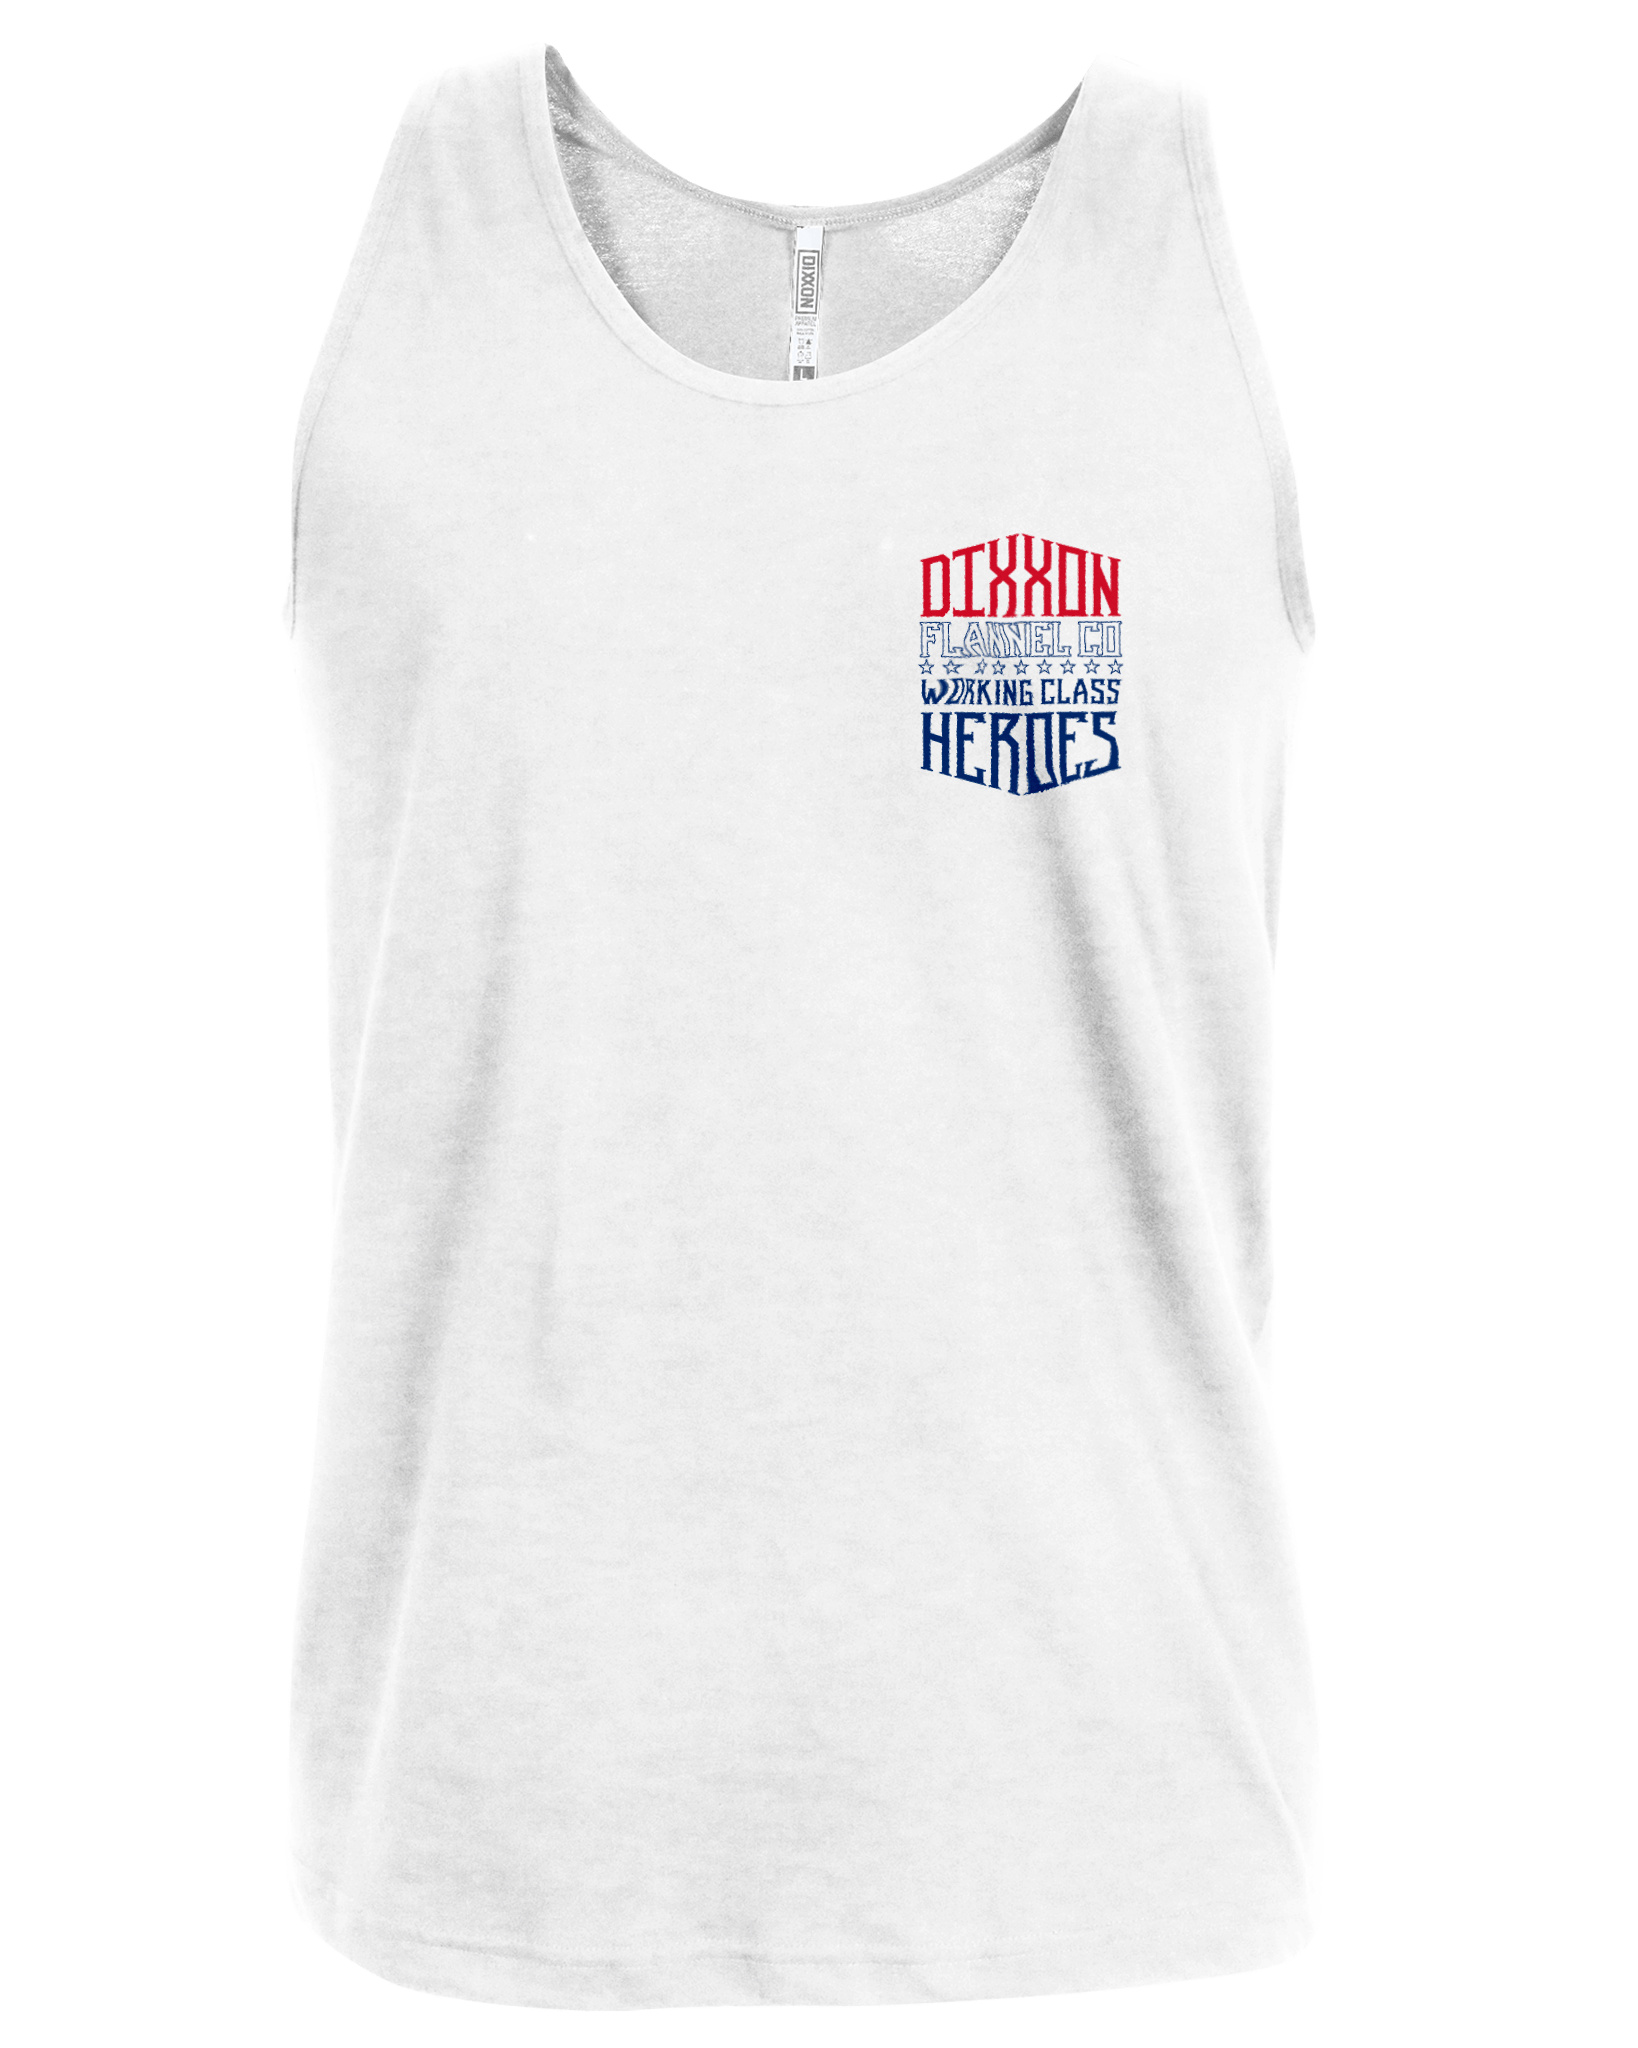 Working Class Heroes Tank - Red, White, & Blue